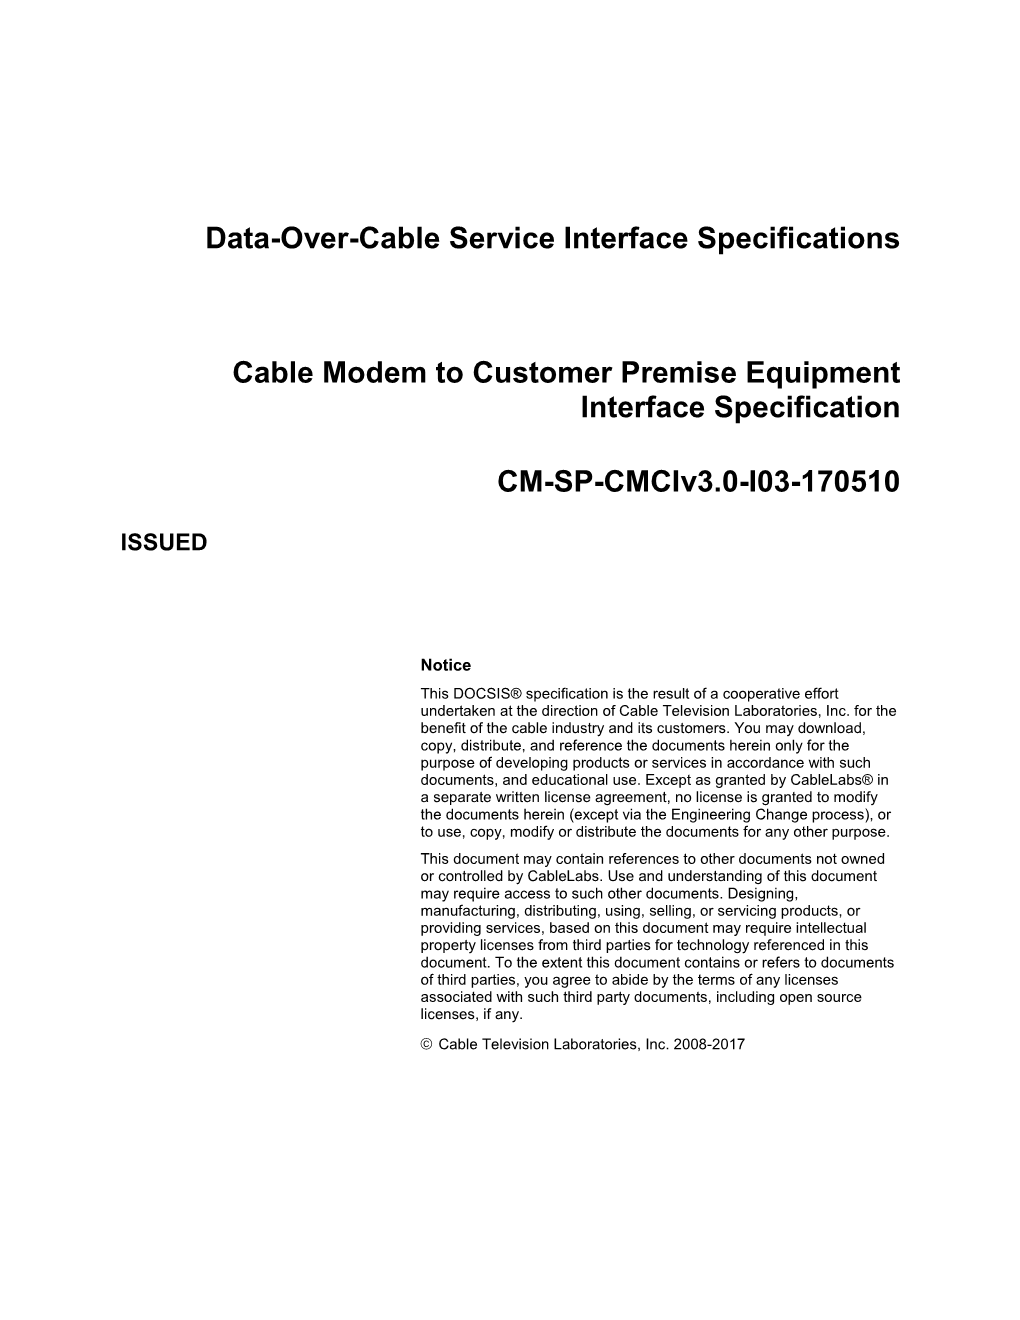 Data-Over-Cable Service Interface Specifications Cable Modem To